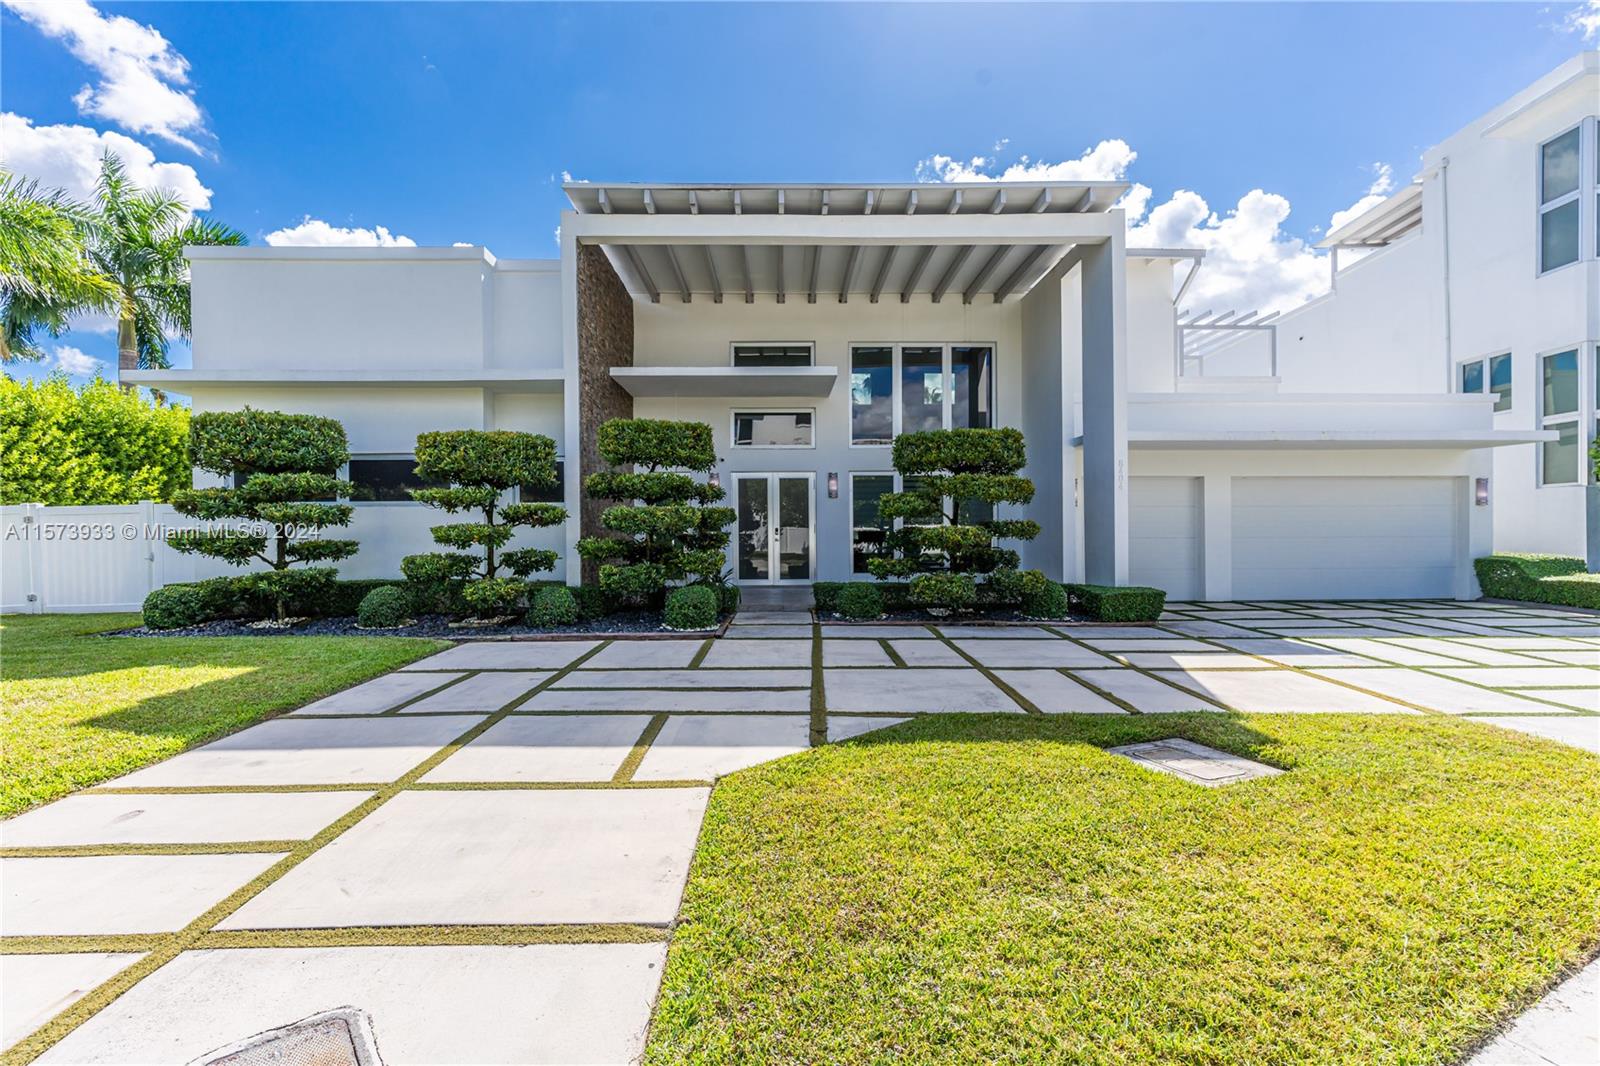 Spectacular home in the best area of Doral, the Oasis Park Square community, living area 3,838 square feet for a total lot of 13,086 SQFT, built in 2015, this MODERN house has 6 bedrooms and 6 Full bath, gourmet chef’s kitchen. Stainless steel appliances (JennAir), high windows impact, electric shutters (hunter-douglas), Jacuzzi, BBQ, Pool, Close access to expressway, right behind Doral City place, a few miles away from Downtown Doral where there is shopping, entertainment, and great restaurants. Excellent A+ school very close, and grocery stores. Family friendly area.